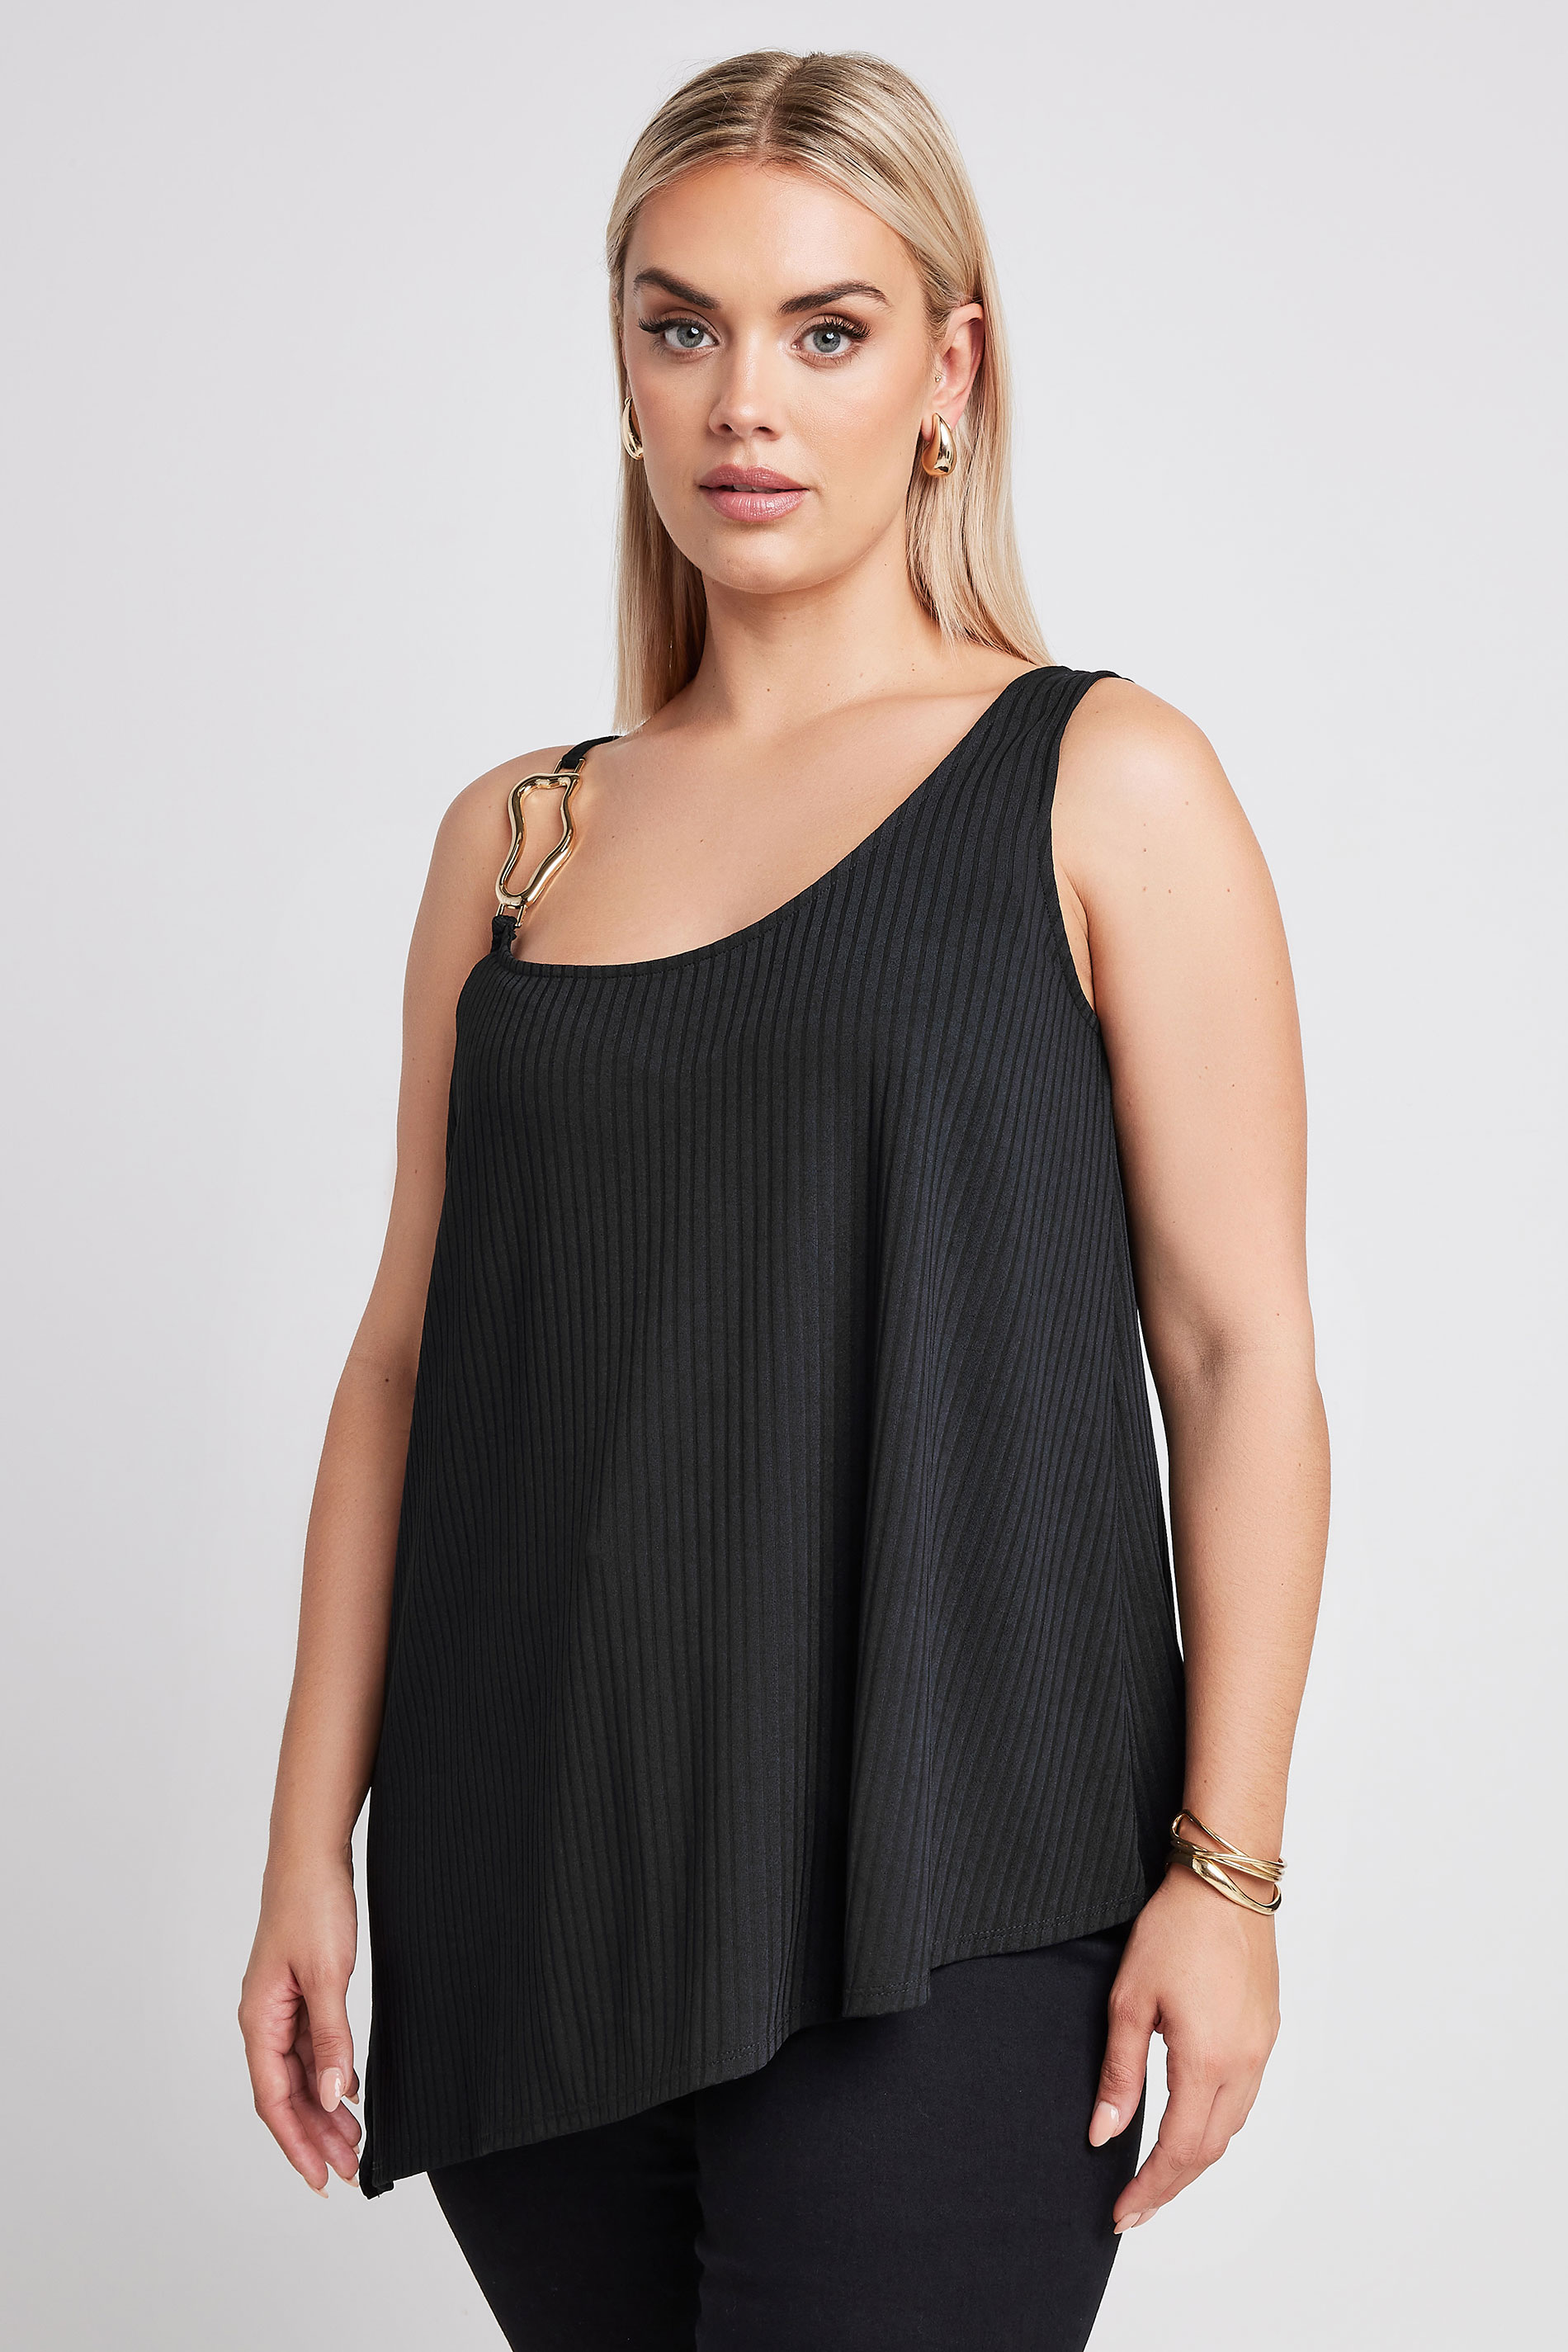 LIMITED COLLECTION Plus Size Black Metal Trim Ribbed Vest Top | Yours Clothing 1